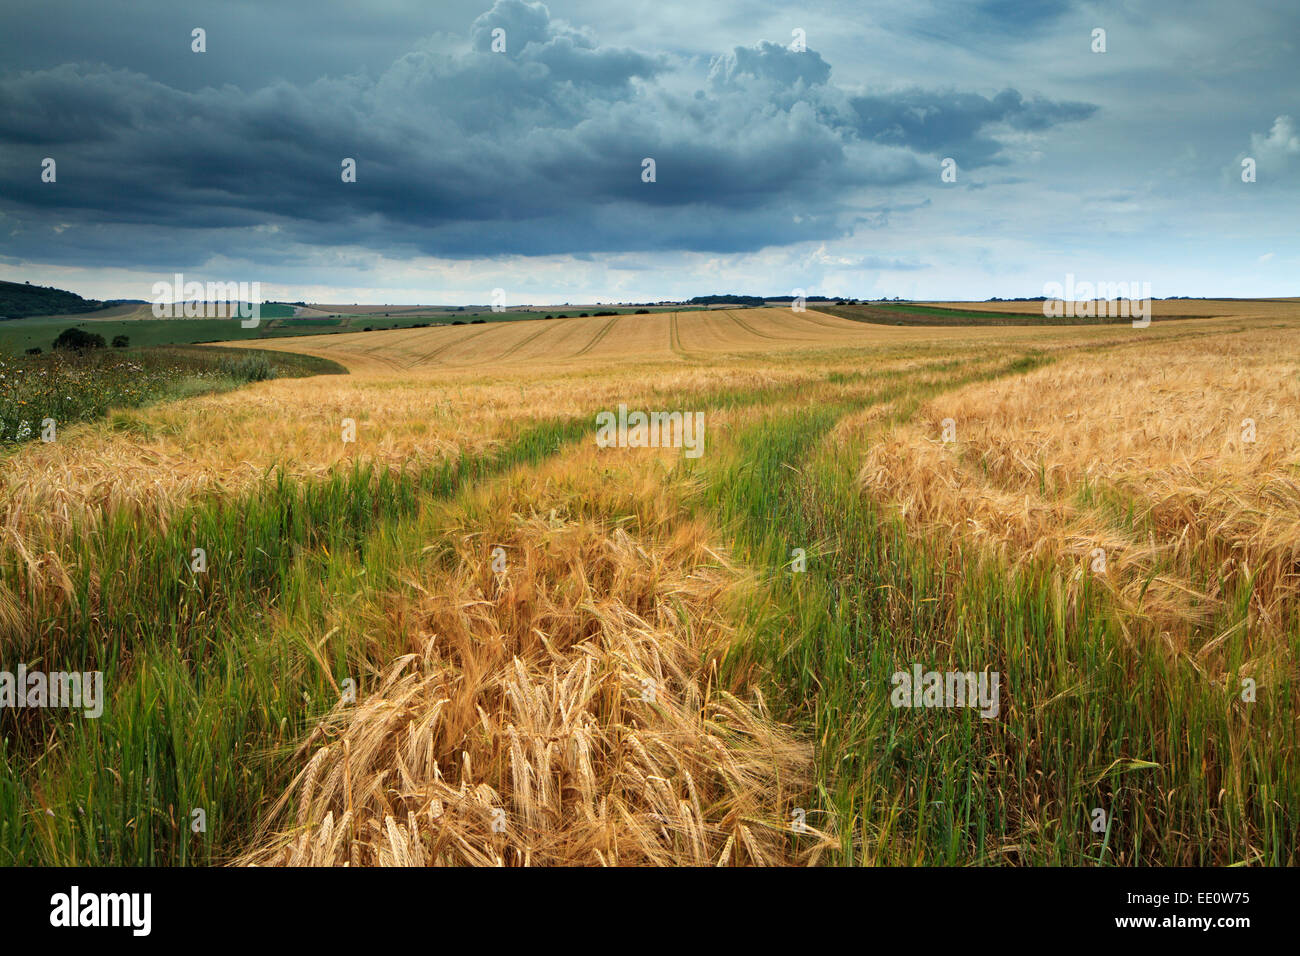 Summers field of Wheat, Lychpole Bottom, NR Steyning Bowl, West Sussex Stock Photo